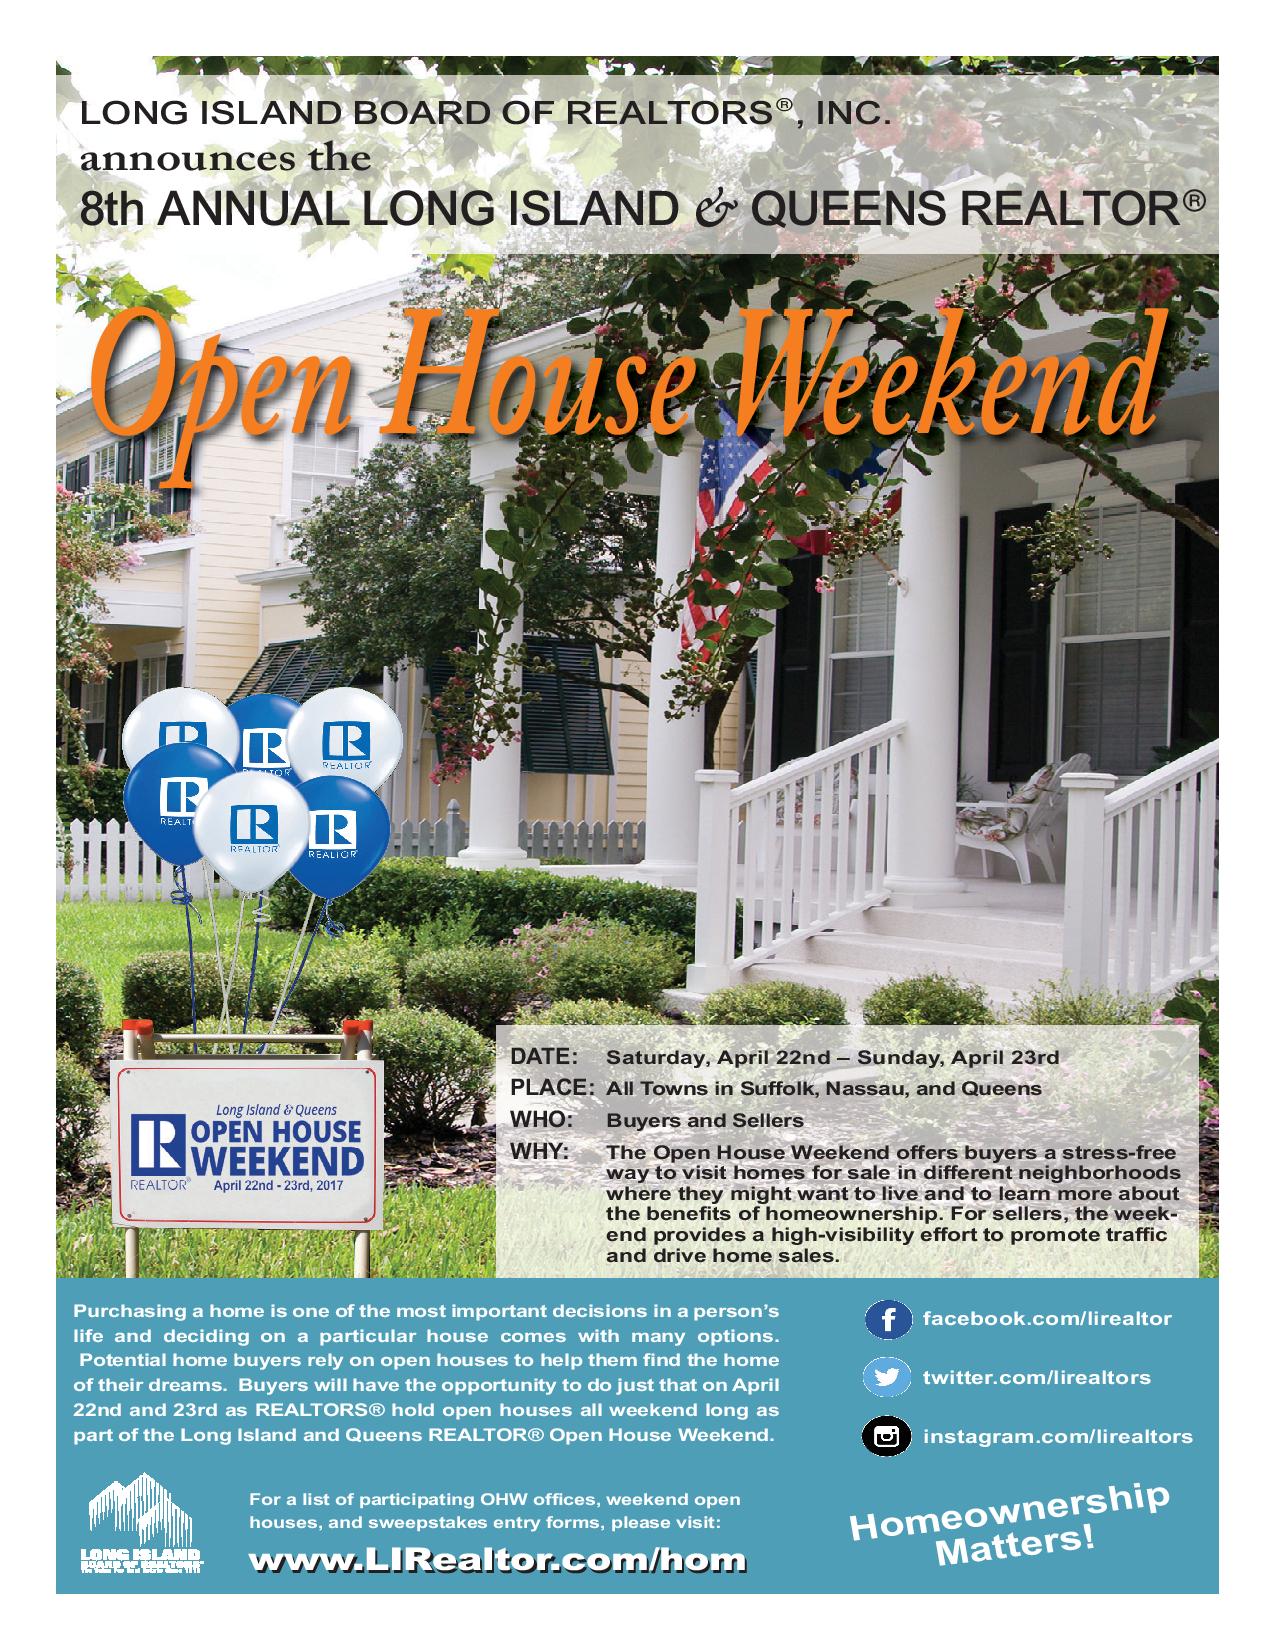 Open House Weekend - April 22 & 23, 2017